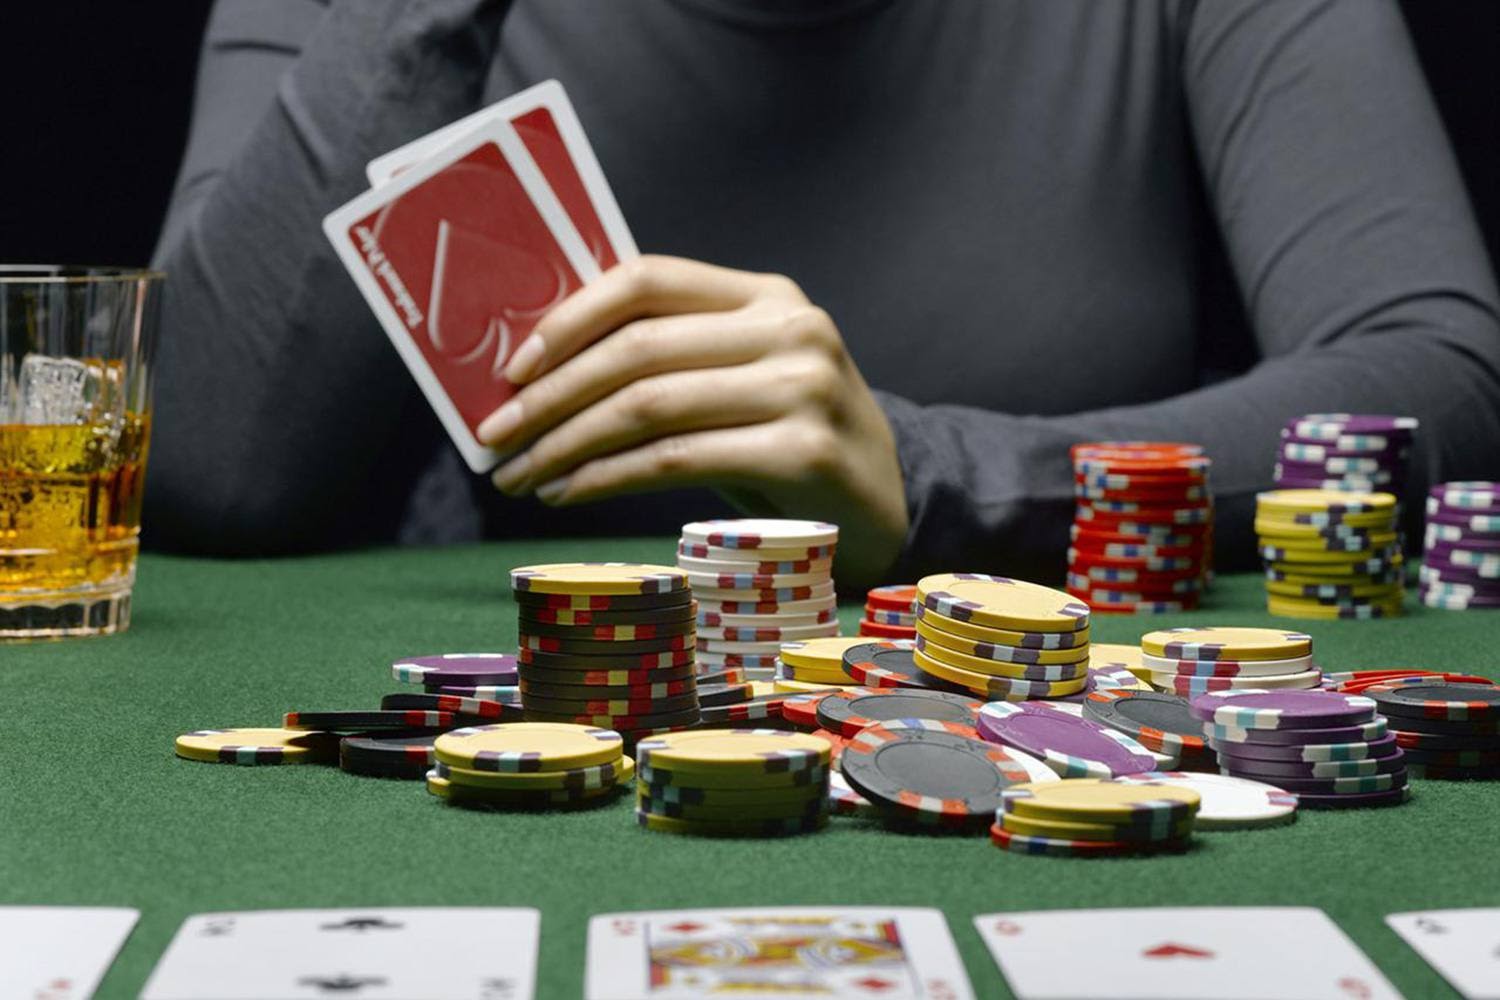 Frequently asked questions on Texas Hold’em